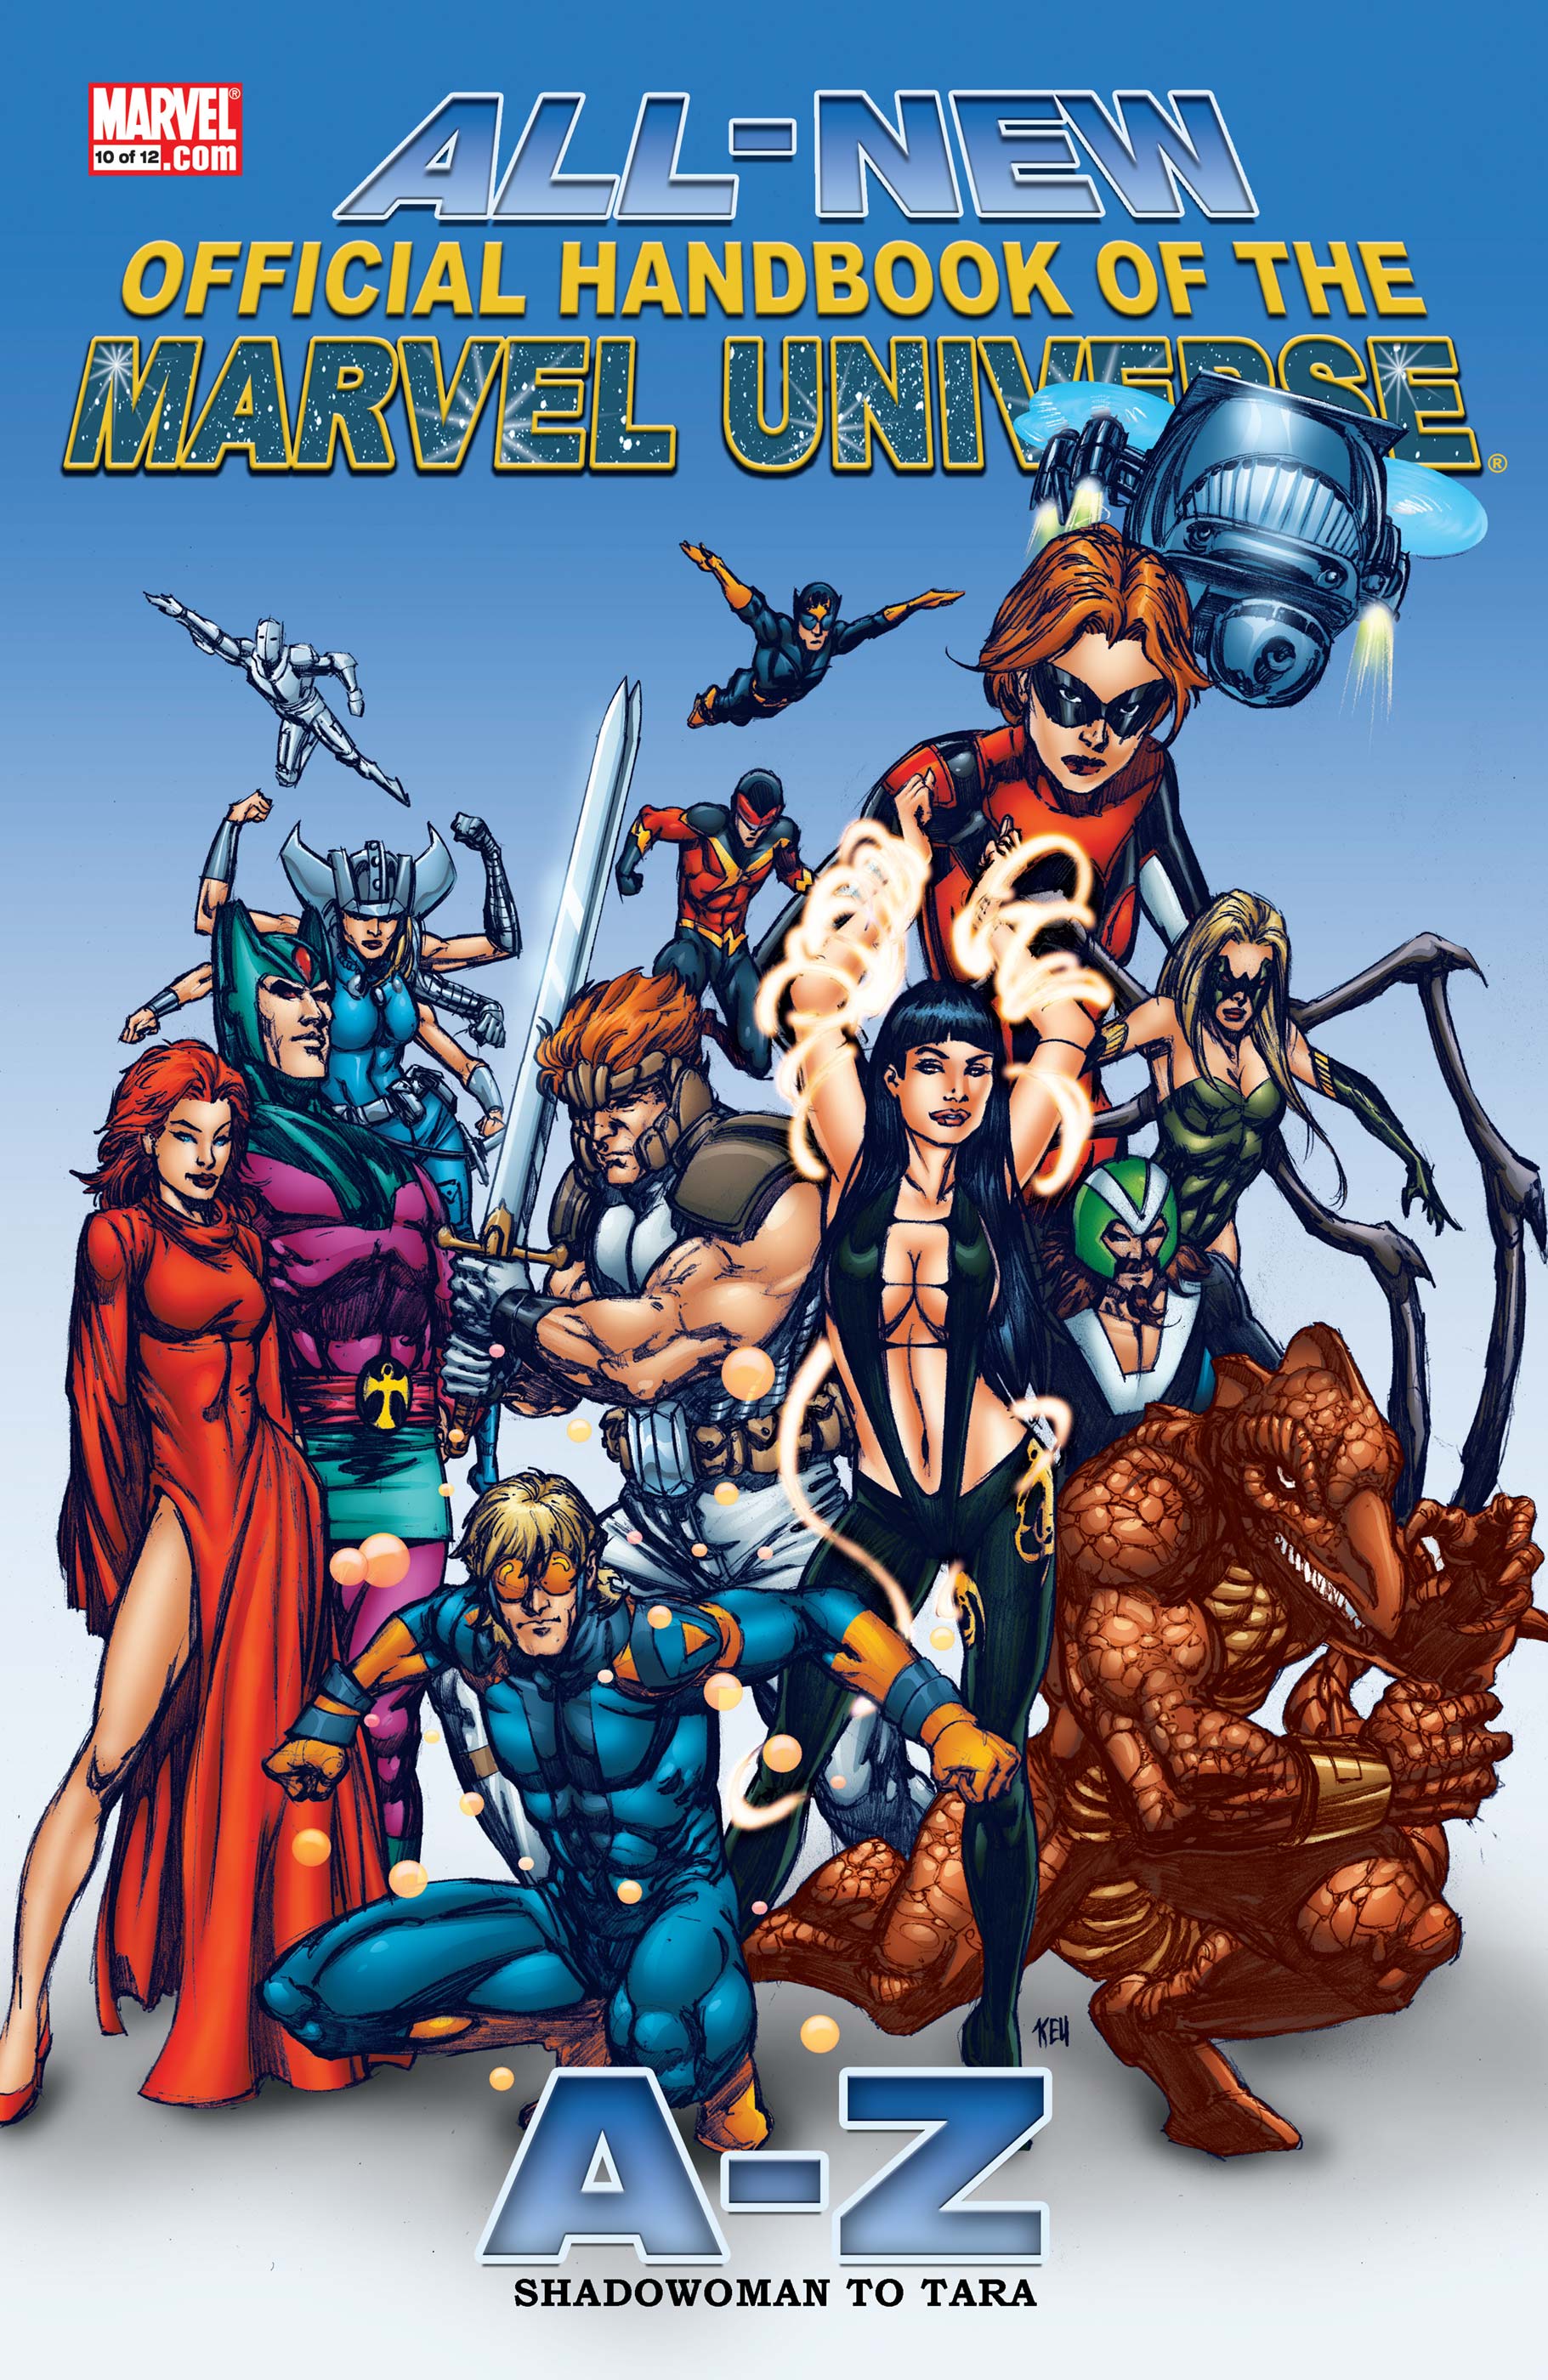 All-New Official Handbook of the Marvel Universe A to Z (2006) #10